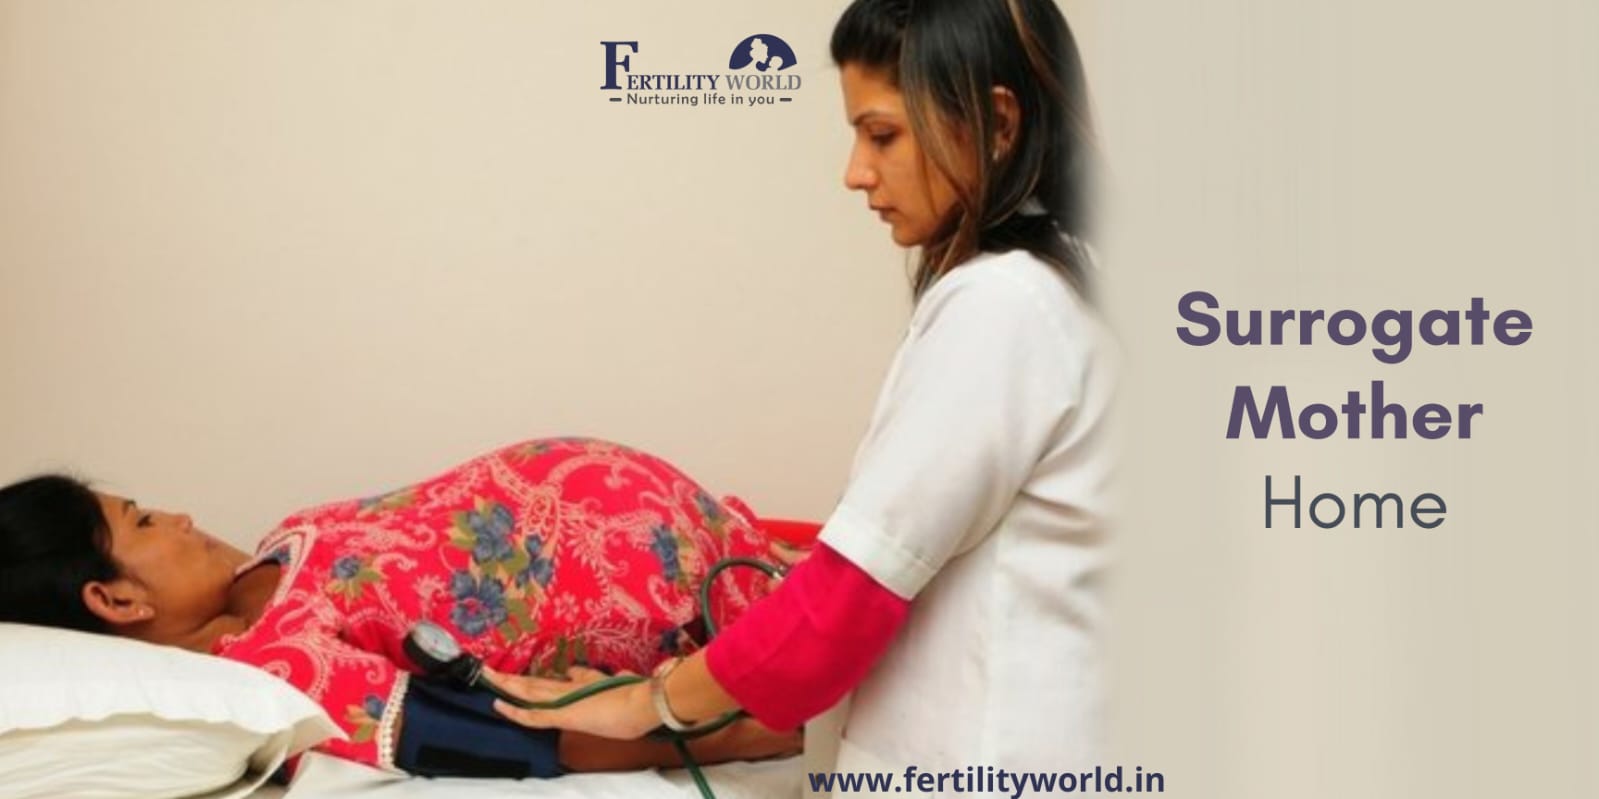 Surrogate Mother's Home in India